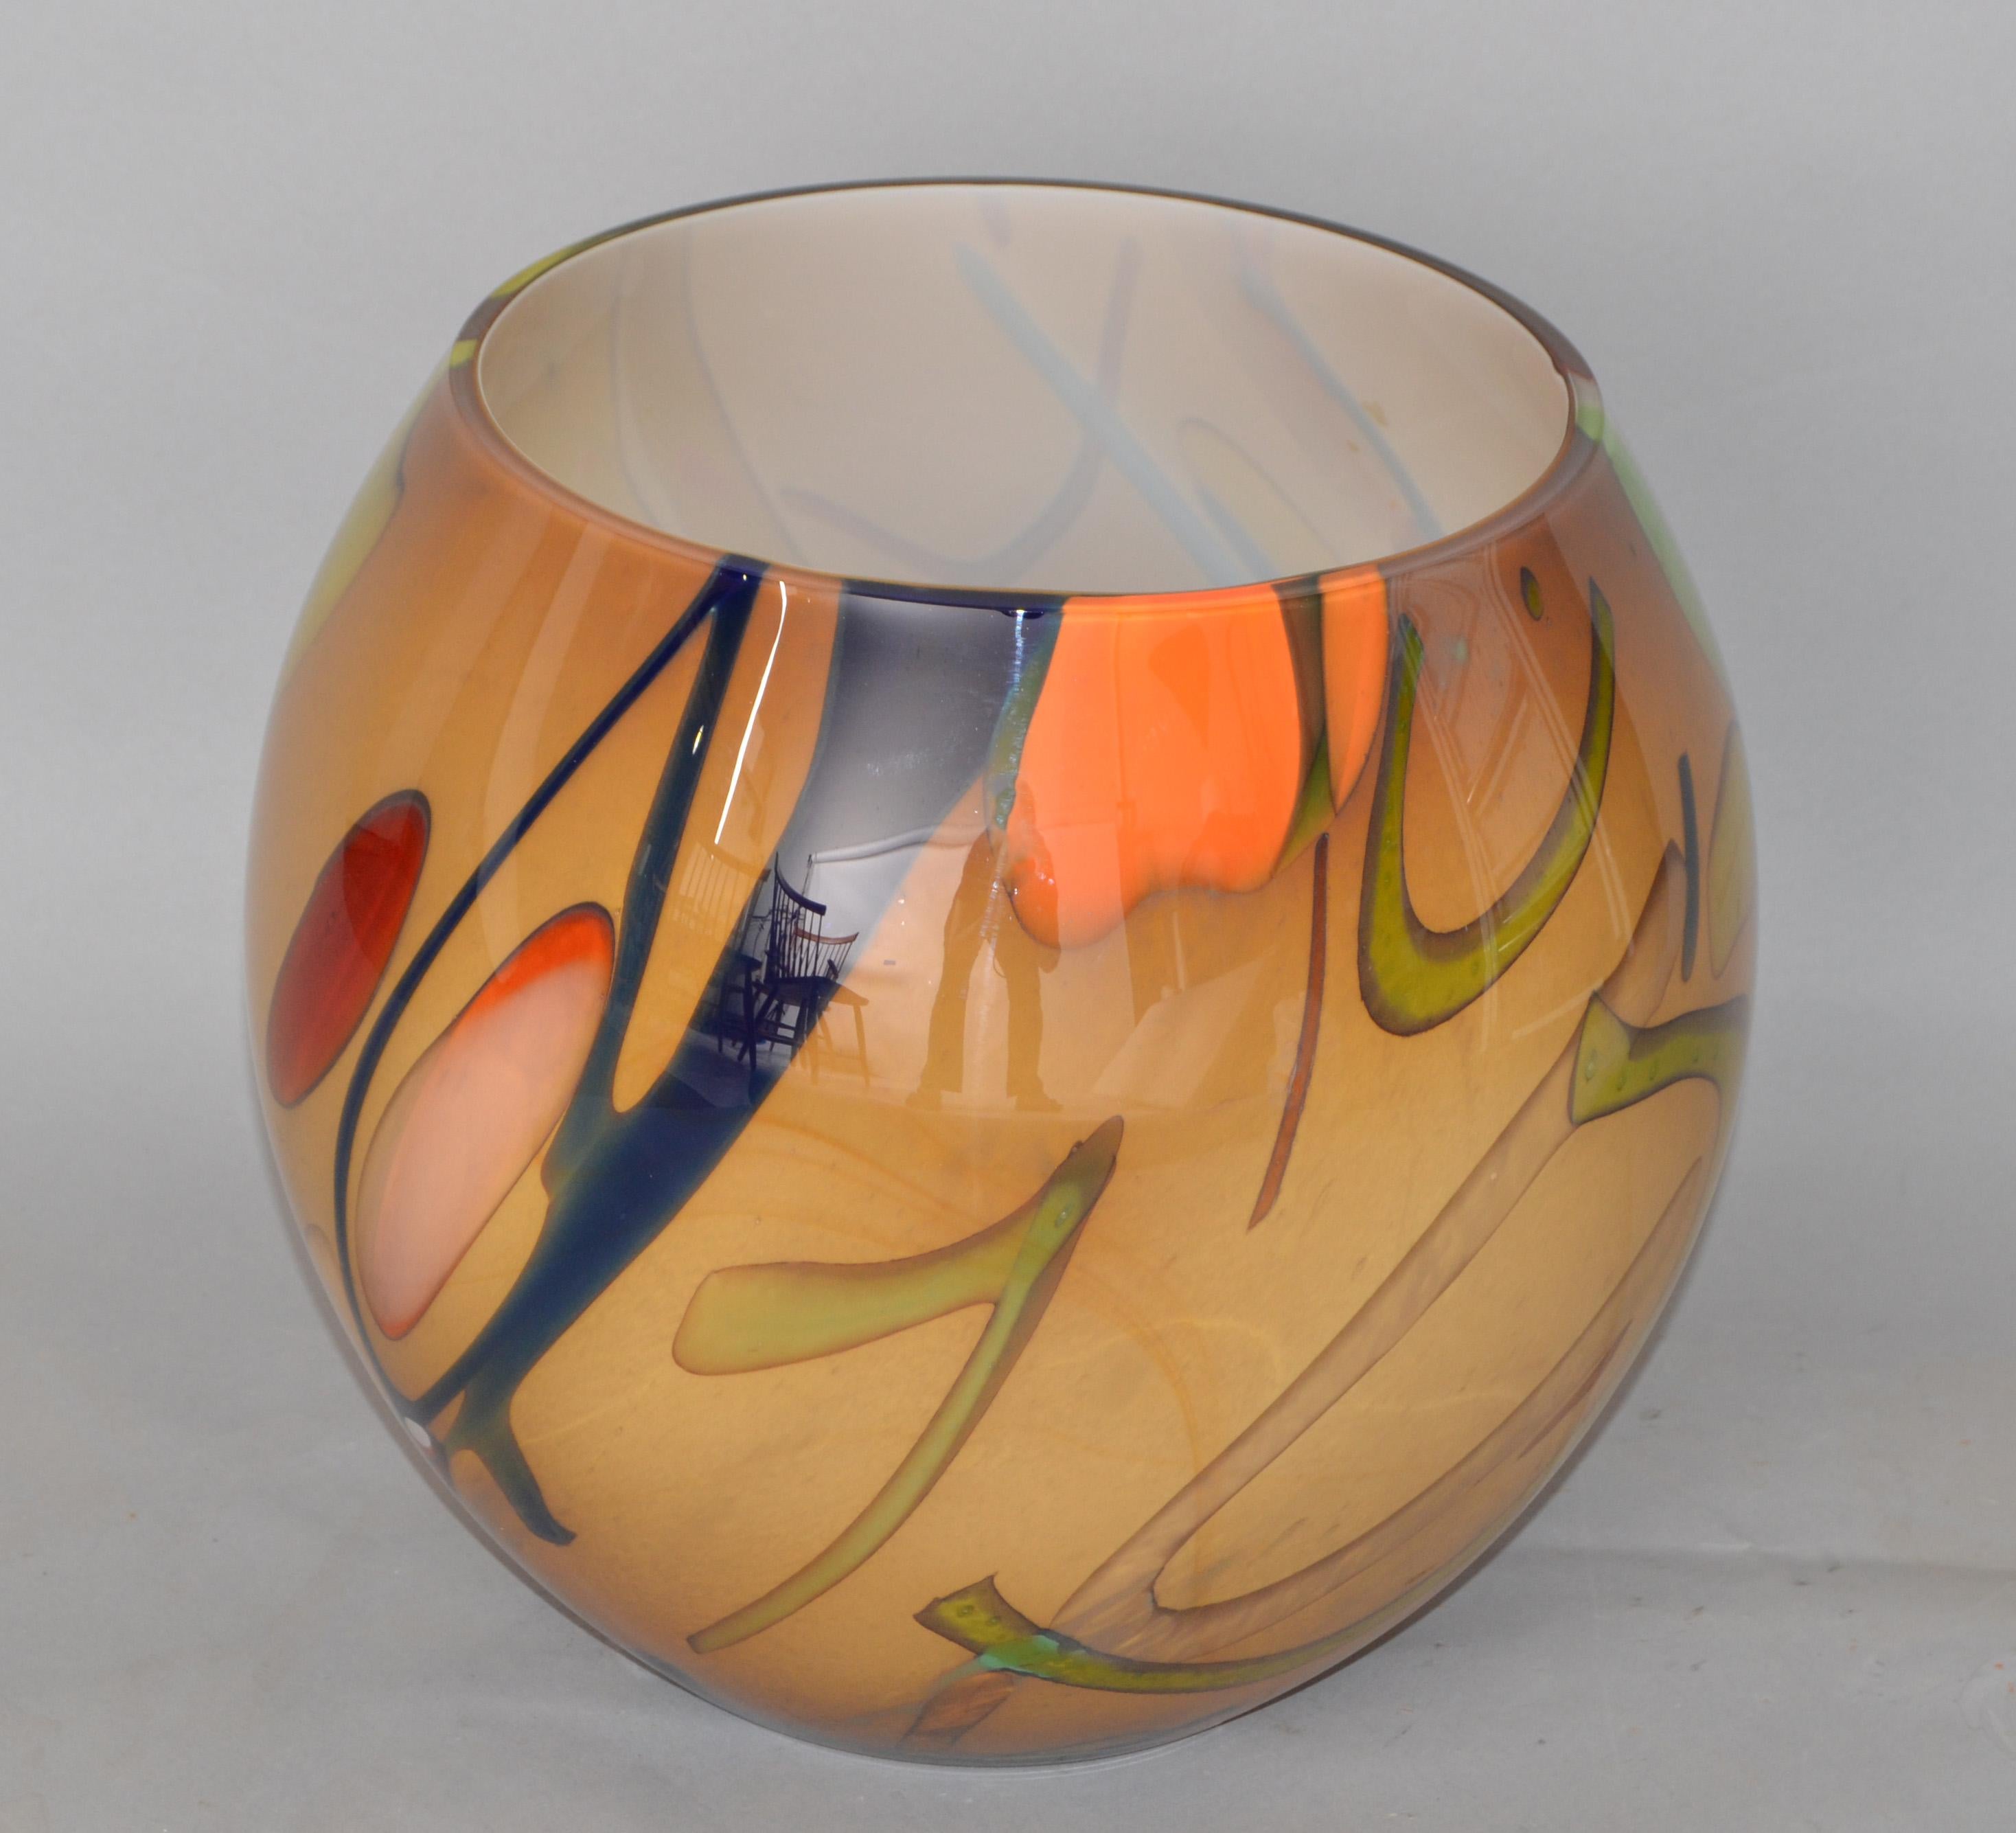 20th Century Mid-Century Modern Art Glass Hues of Brown Round Vase Made in Europe Poland 1980 For Sale